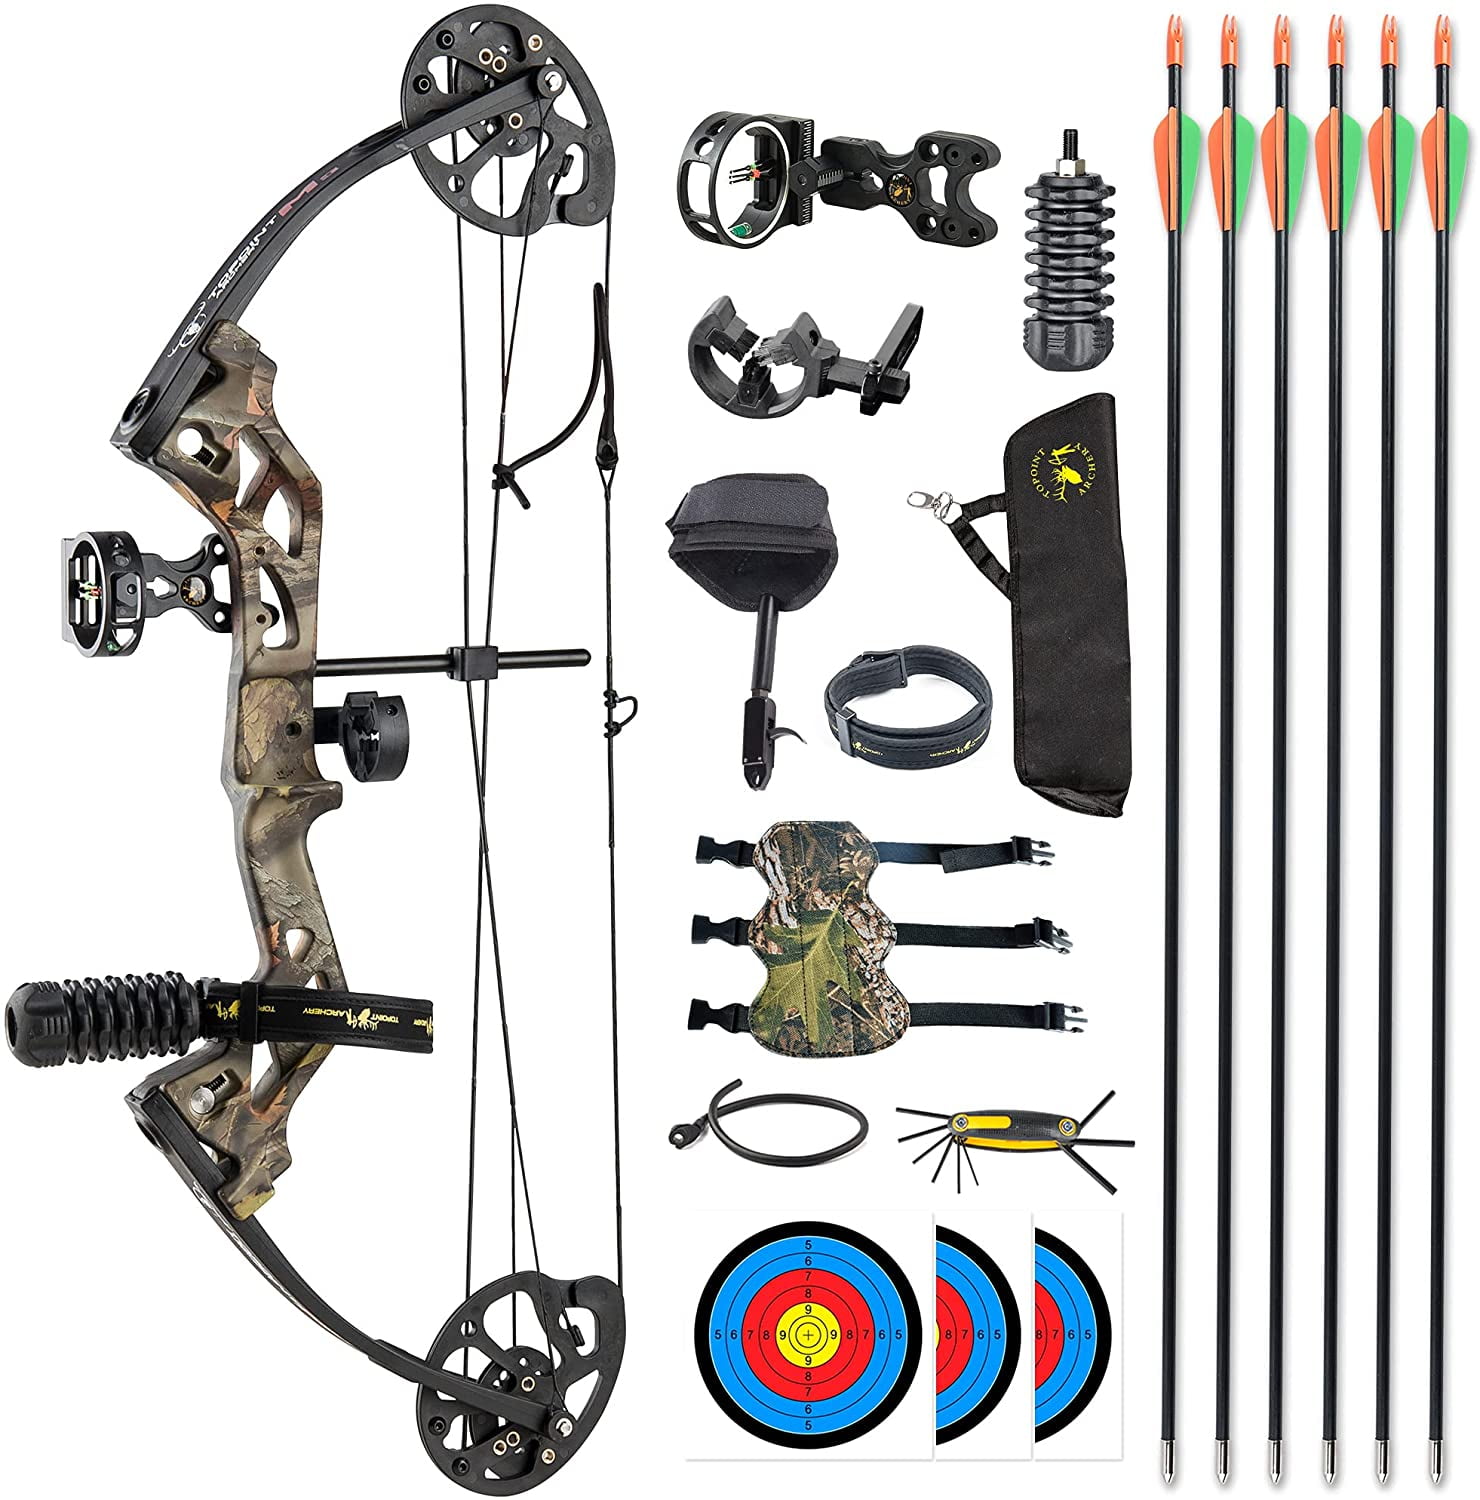 Compound Bow and Archery Sets, Hunting Bow Kit for Beginner